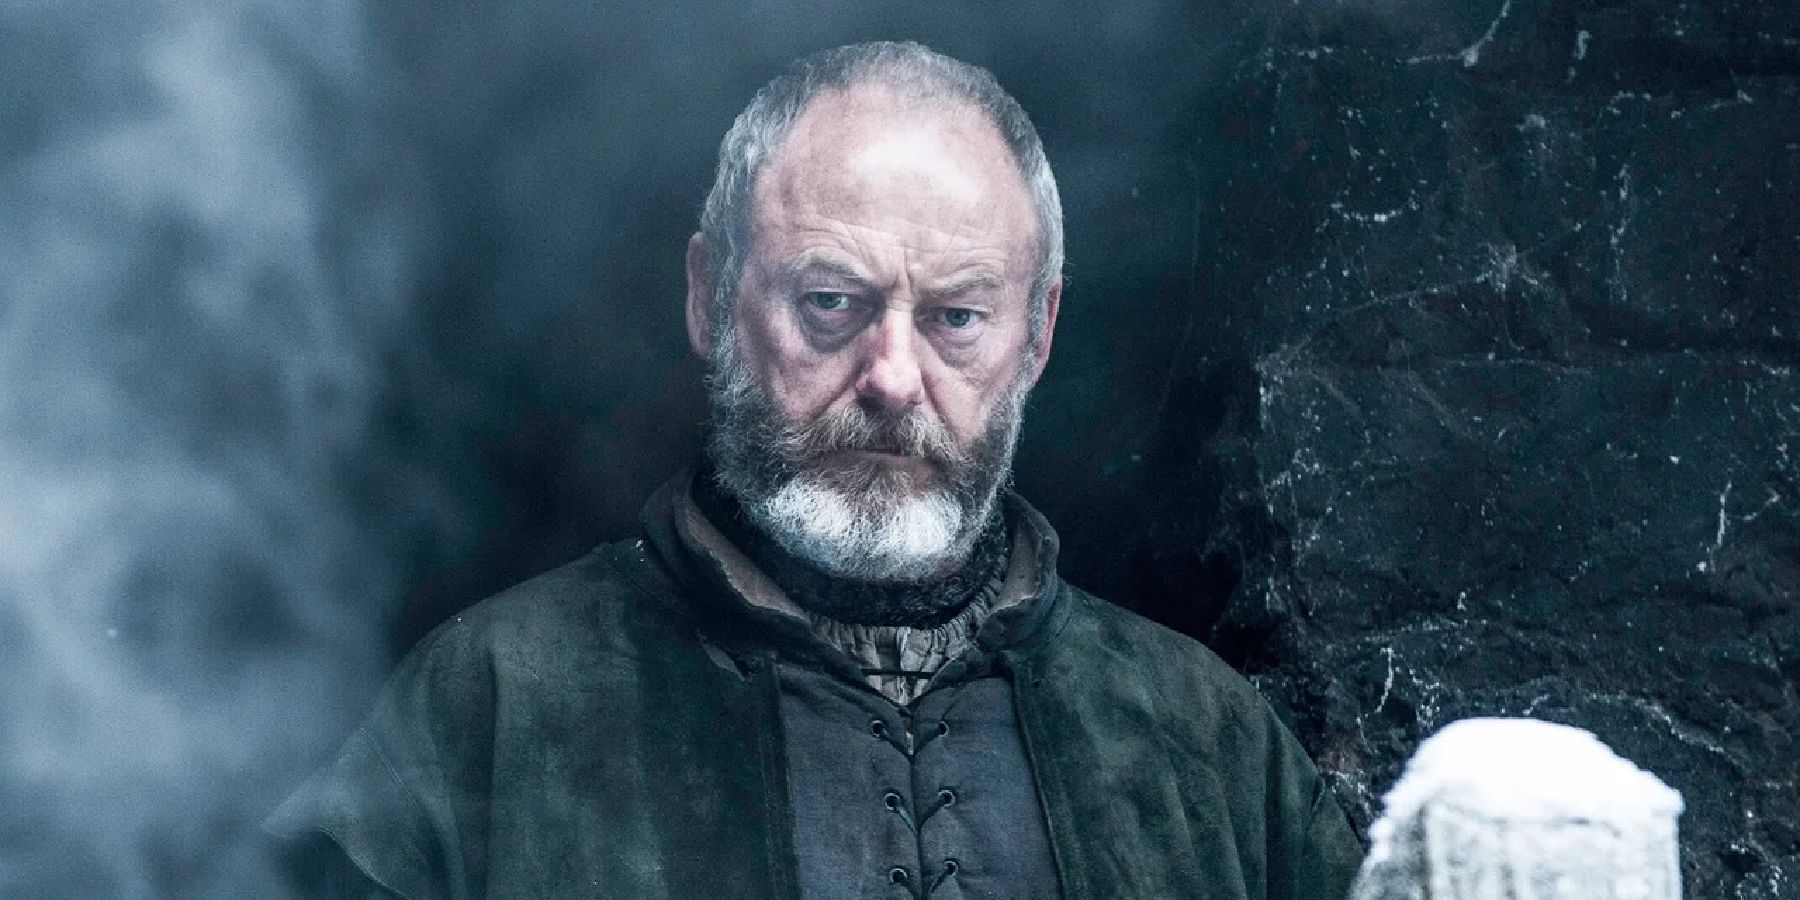 Davos Seaworth played by Liam Cunningham